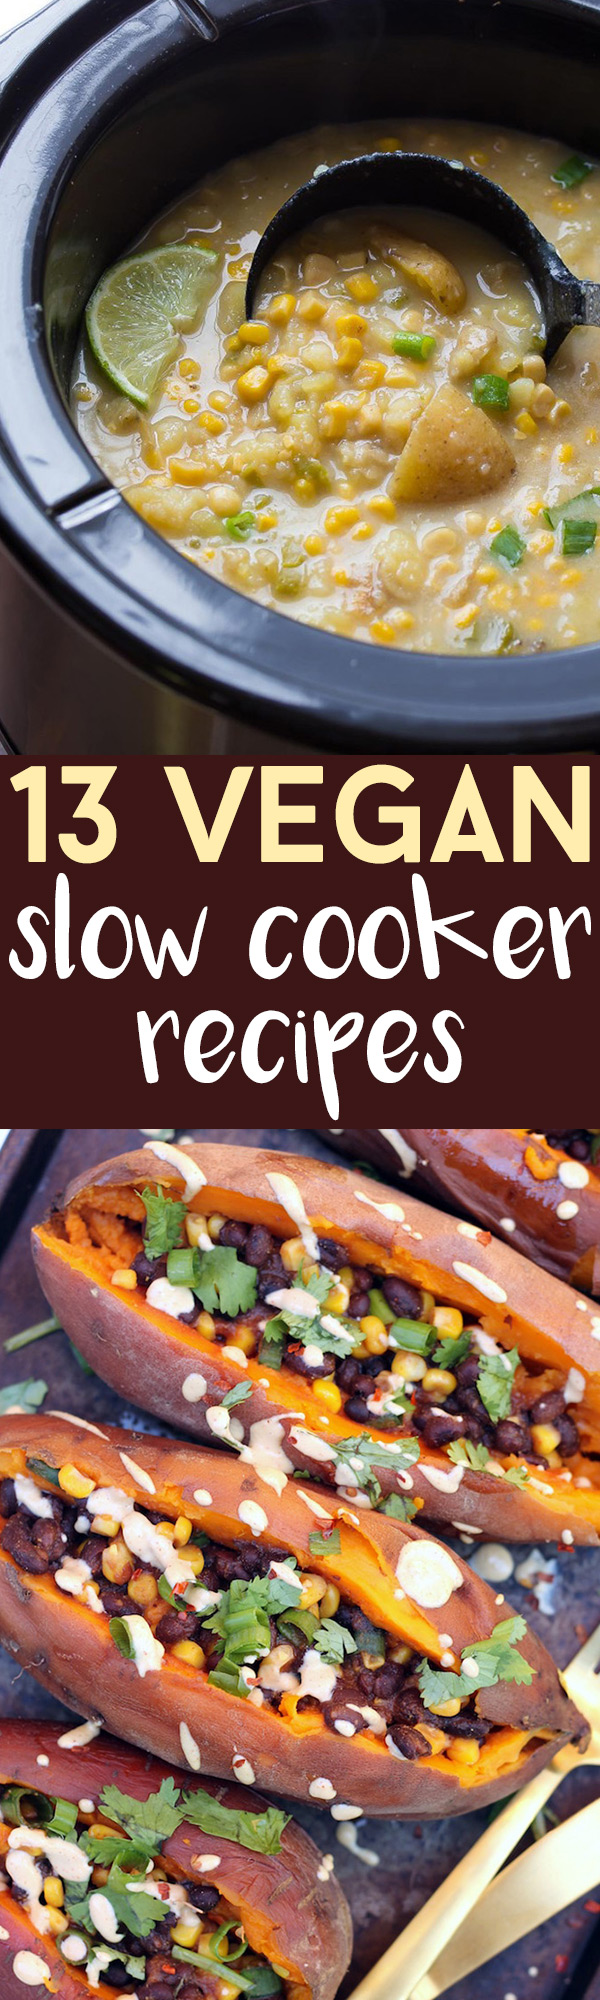 Get cozy this winter and bust out your Crockpot for these Vegan Slow Cooker recipes! Lots of hearty chills, soups & even oatmeal. Perfect for cold nights!